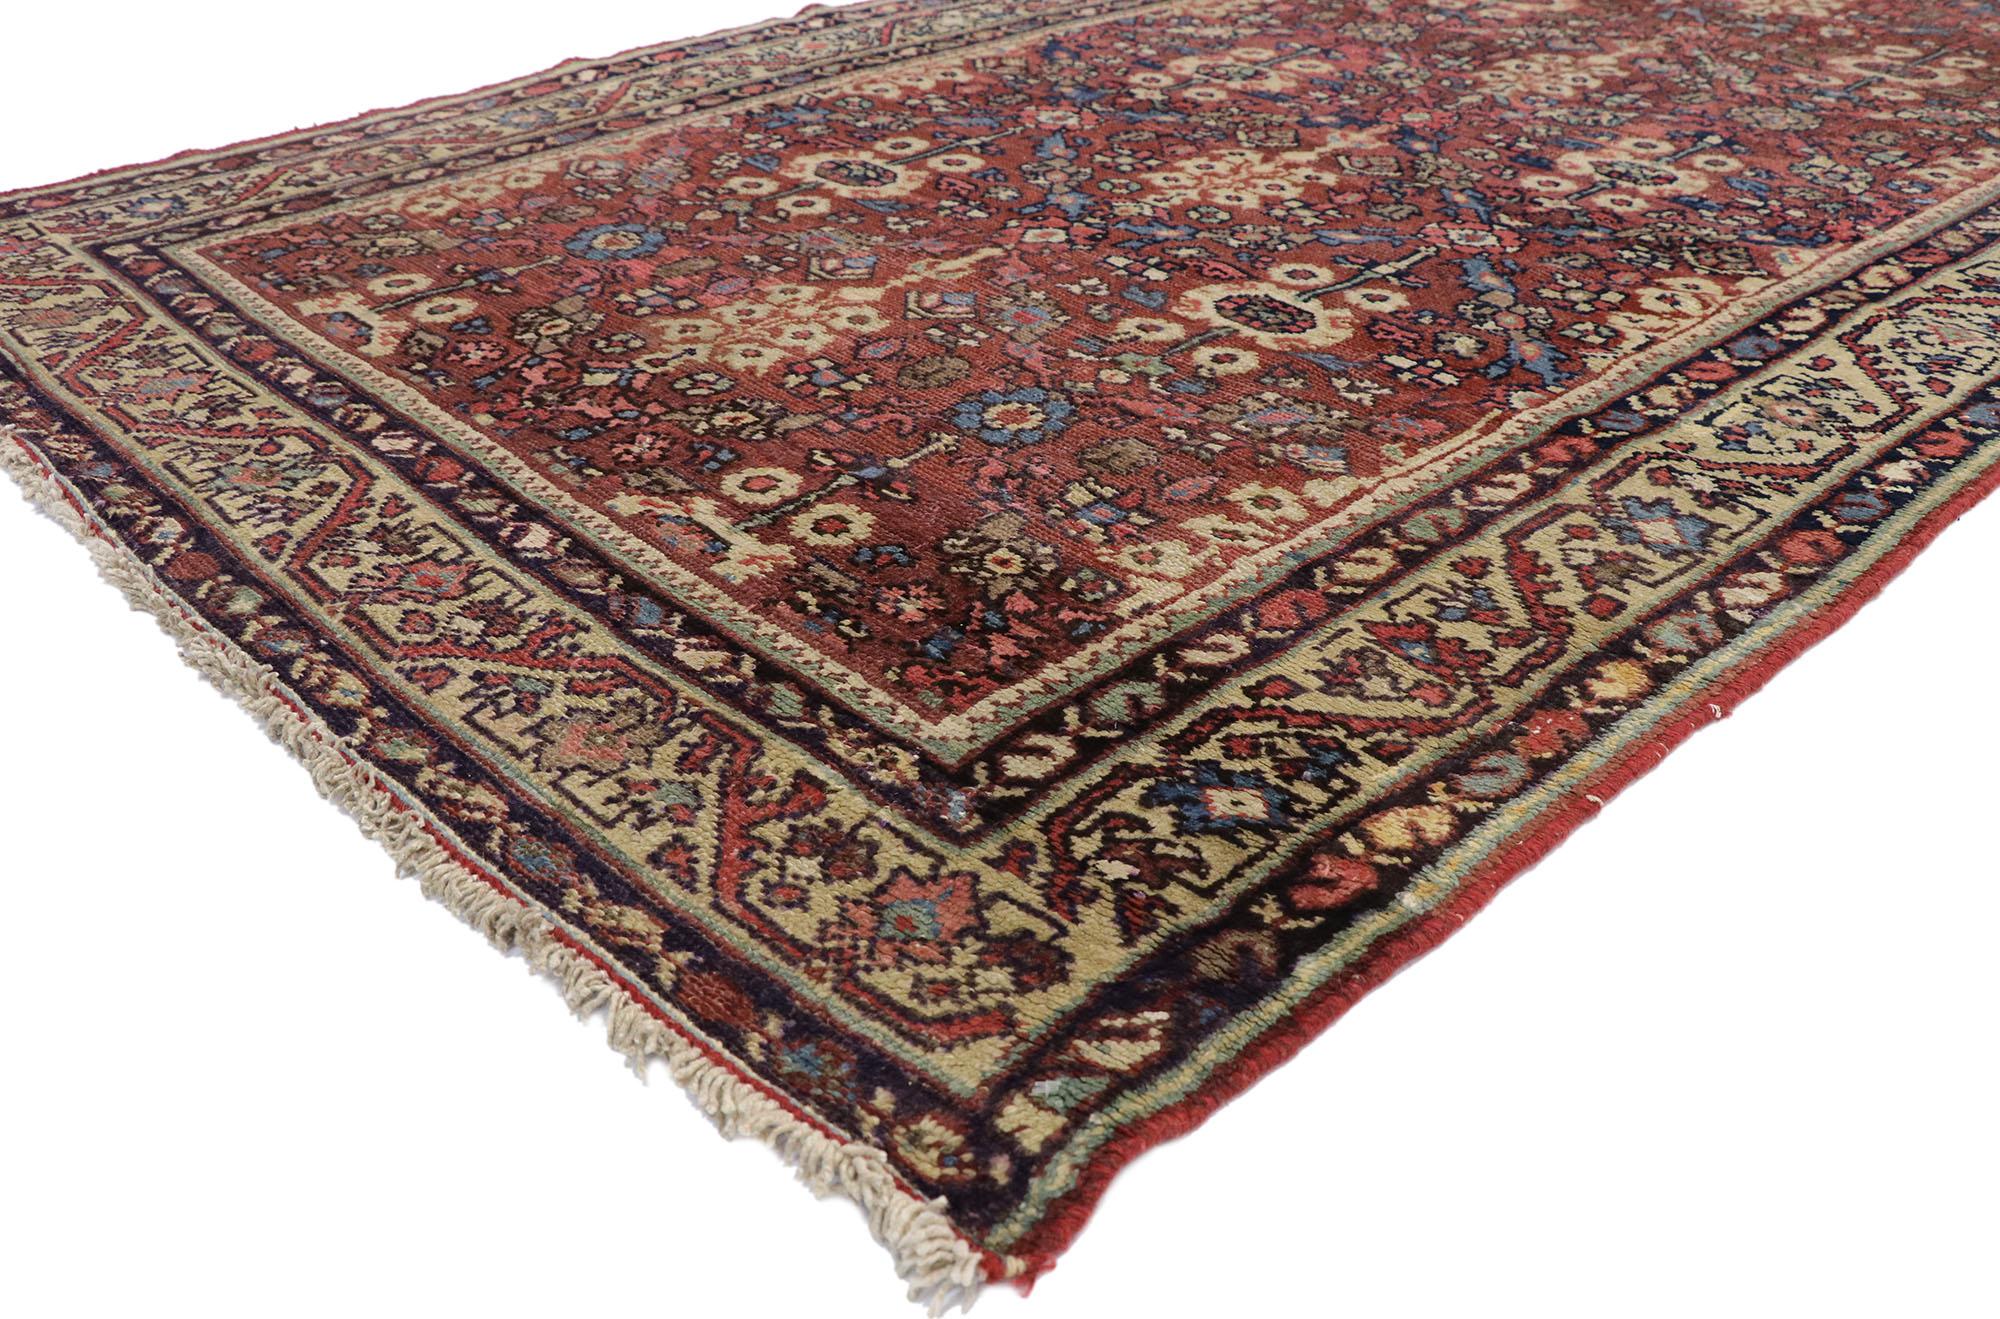 75784 Antique Persian Hamadan Runner with Guli Hinnai Flower, Persian Hallway Runner. This hand knotted wool antique Persian Hamadan runner features an all-over floral lattice pattern composed of the Guli Henna which is the Flower of Hinnai also